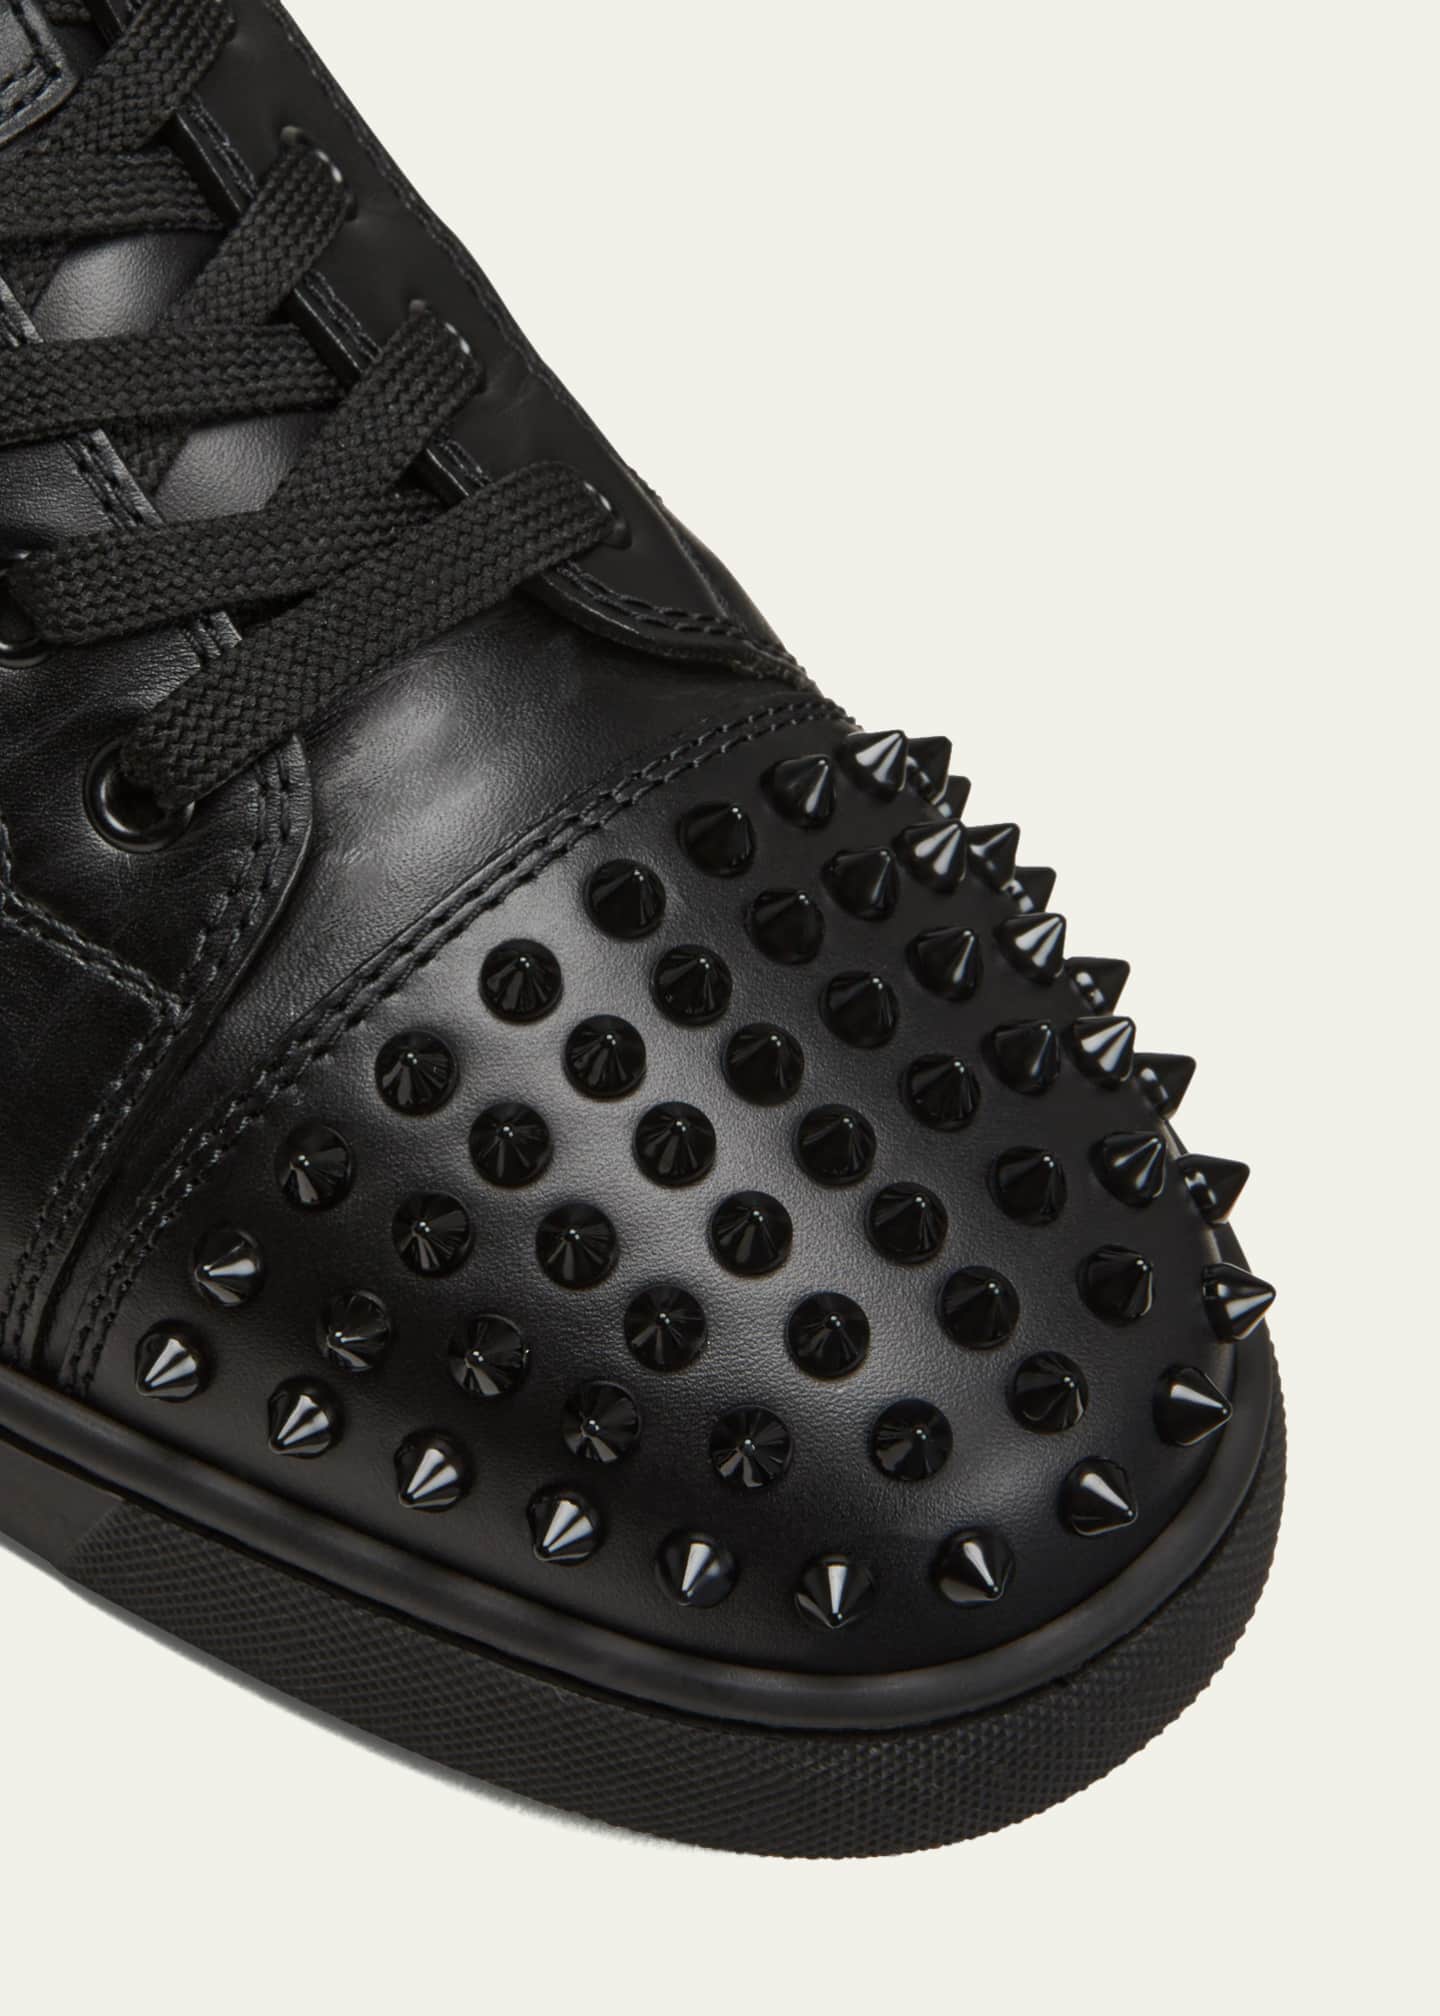 Christian Louboutin Black Leather Louis Junior Spike Sneakers for